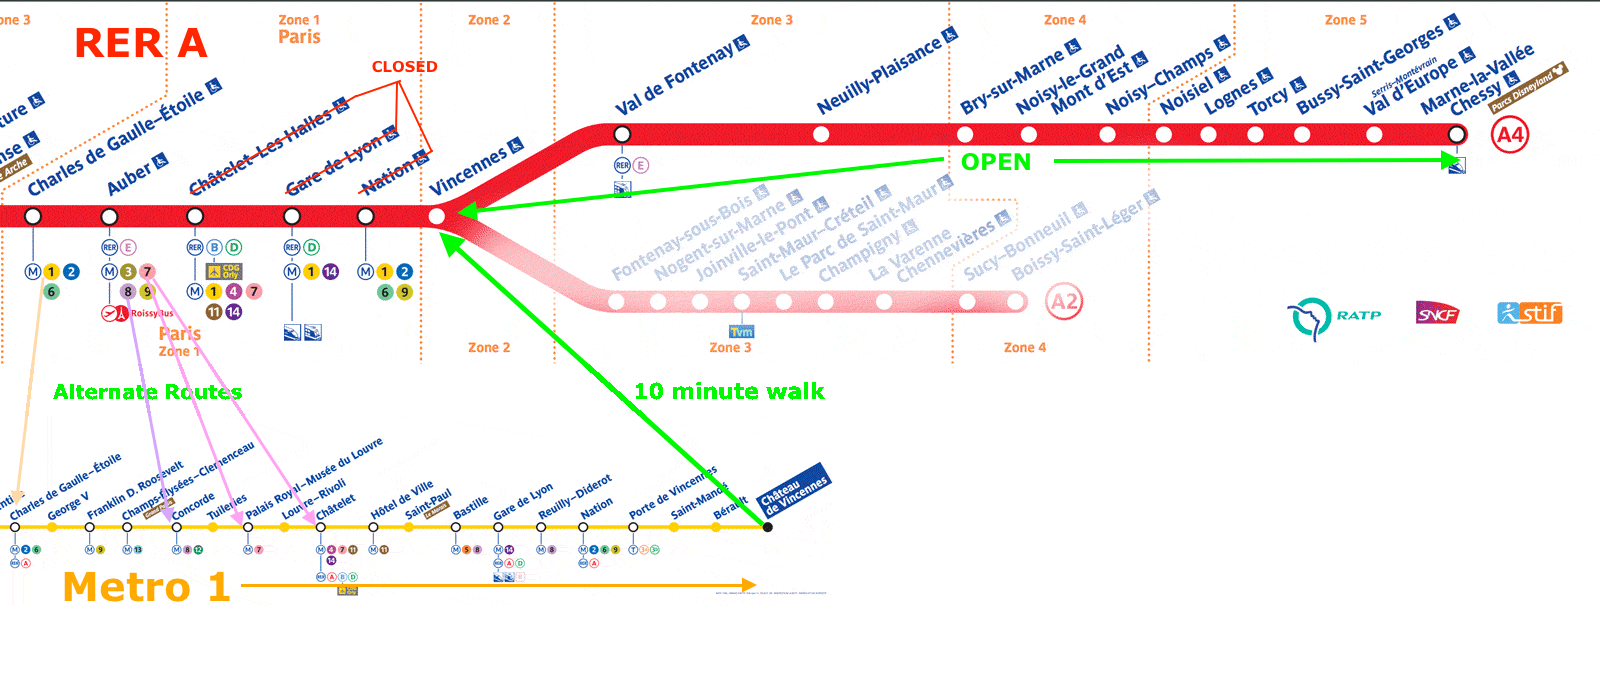 RER A train Disneyland closed stations map